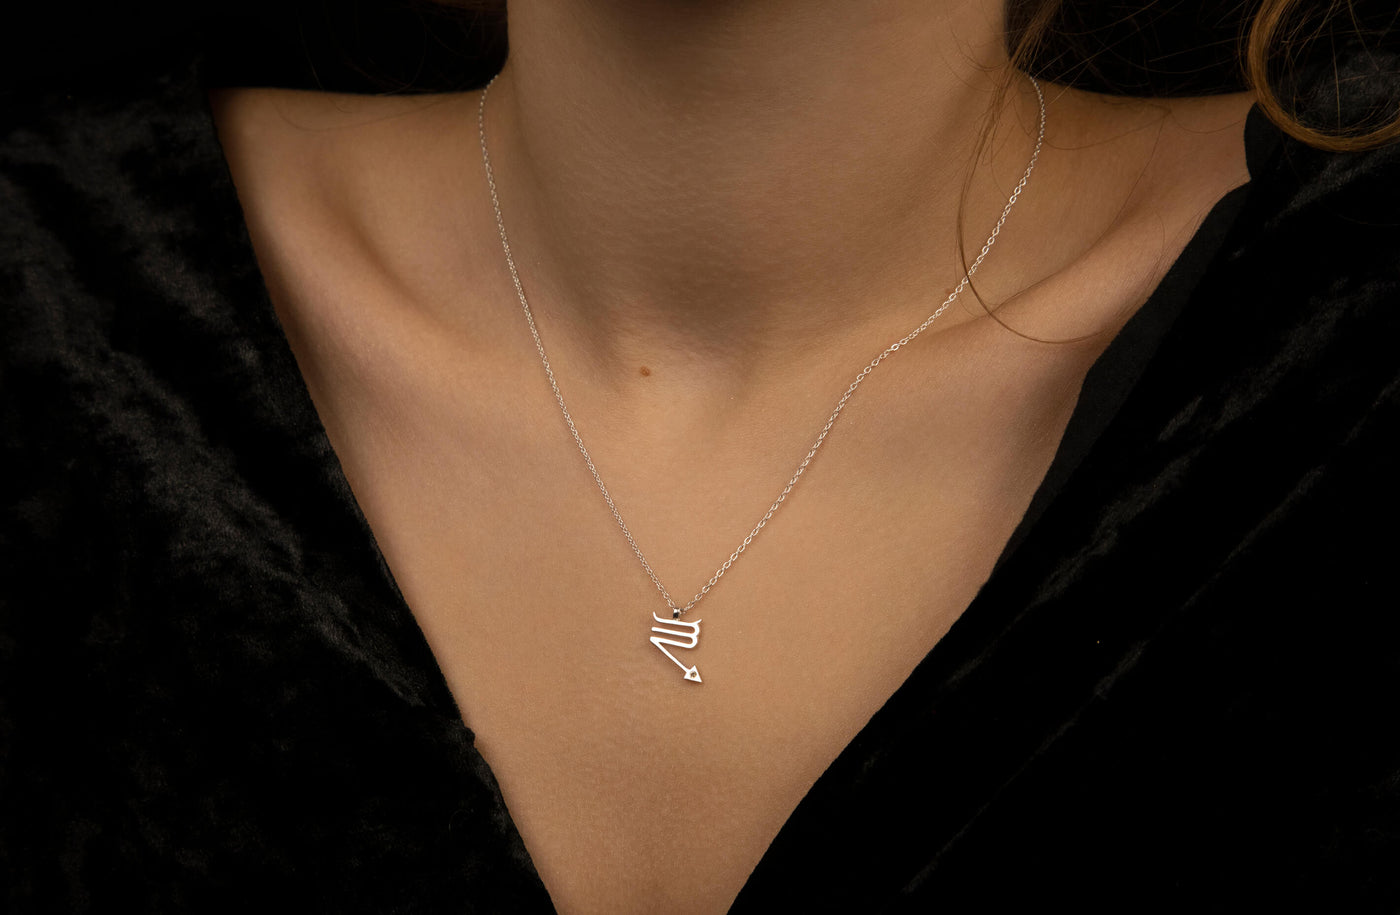 Unisex Scorpio Necklace in Sterling Silver 925 with 0.017 Ct. Diamond.